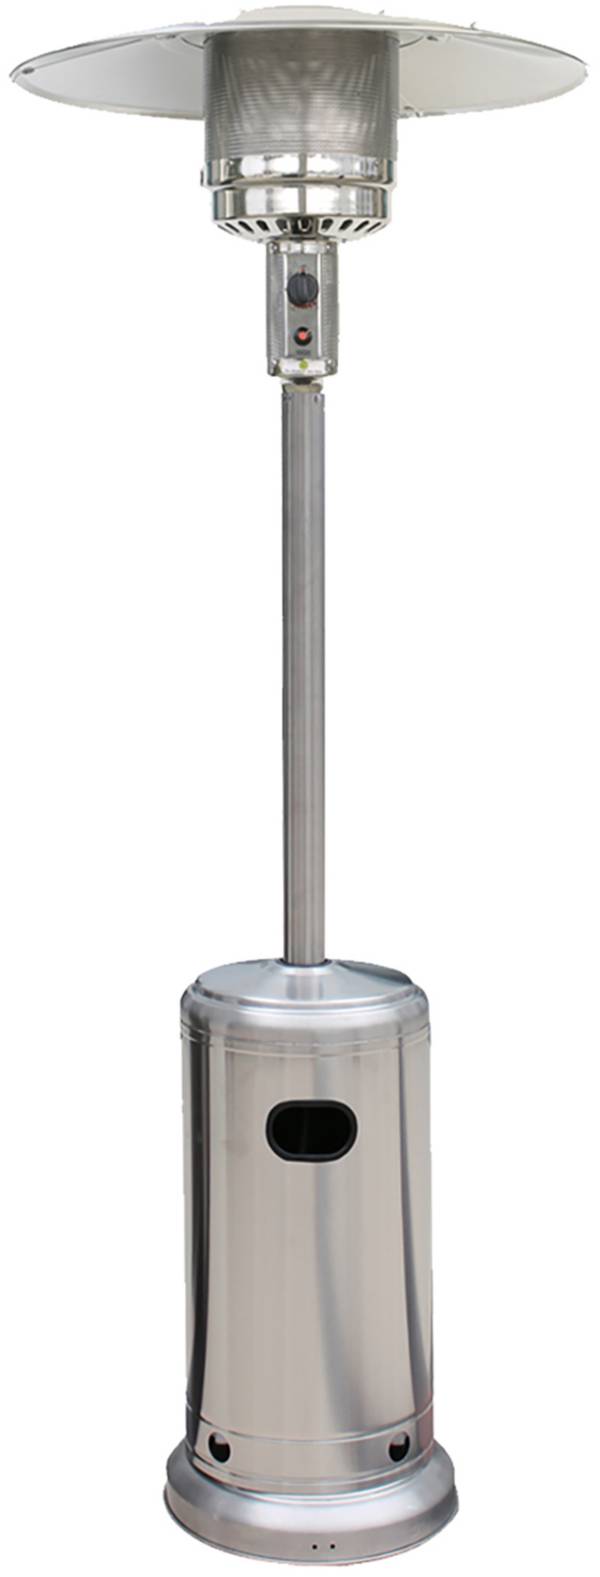 Blue Sky Outdoor Living Stainless Steel Patio Heater product image